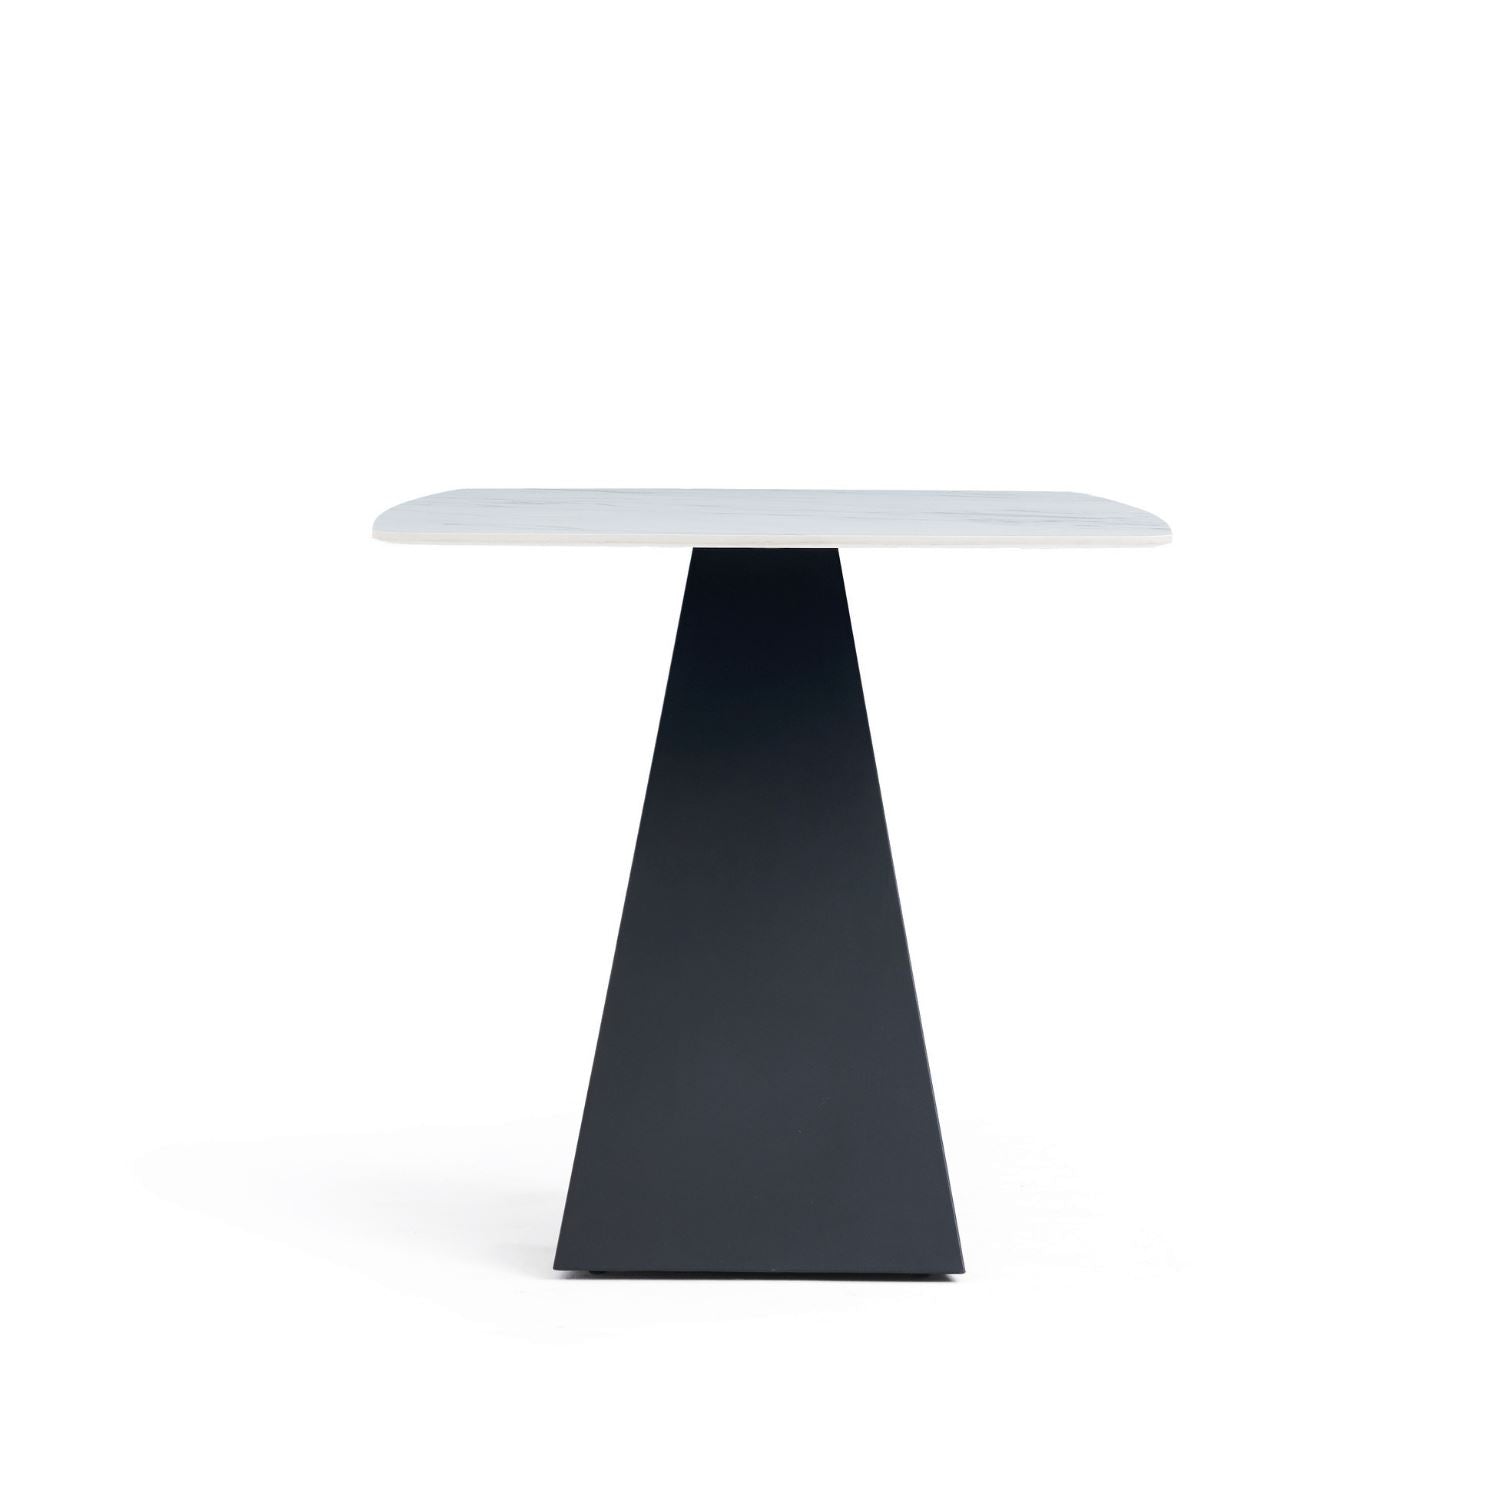 "Fly" Dining Table - Valyou 